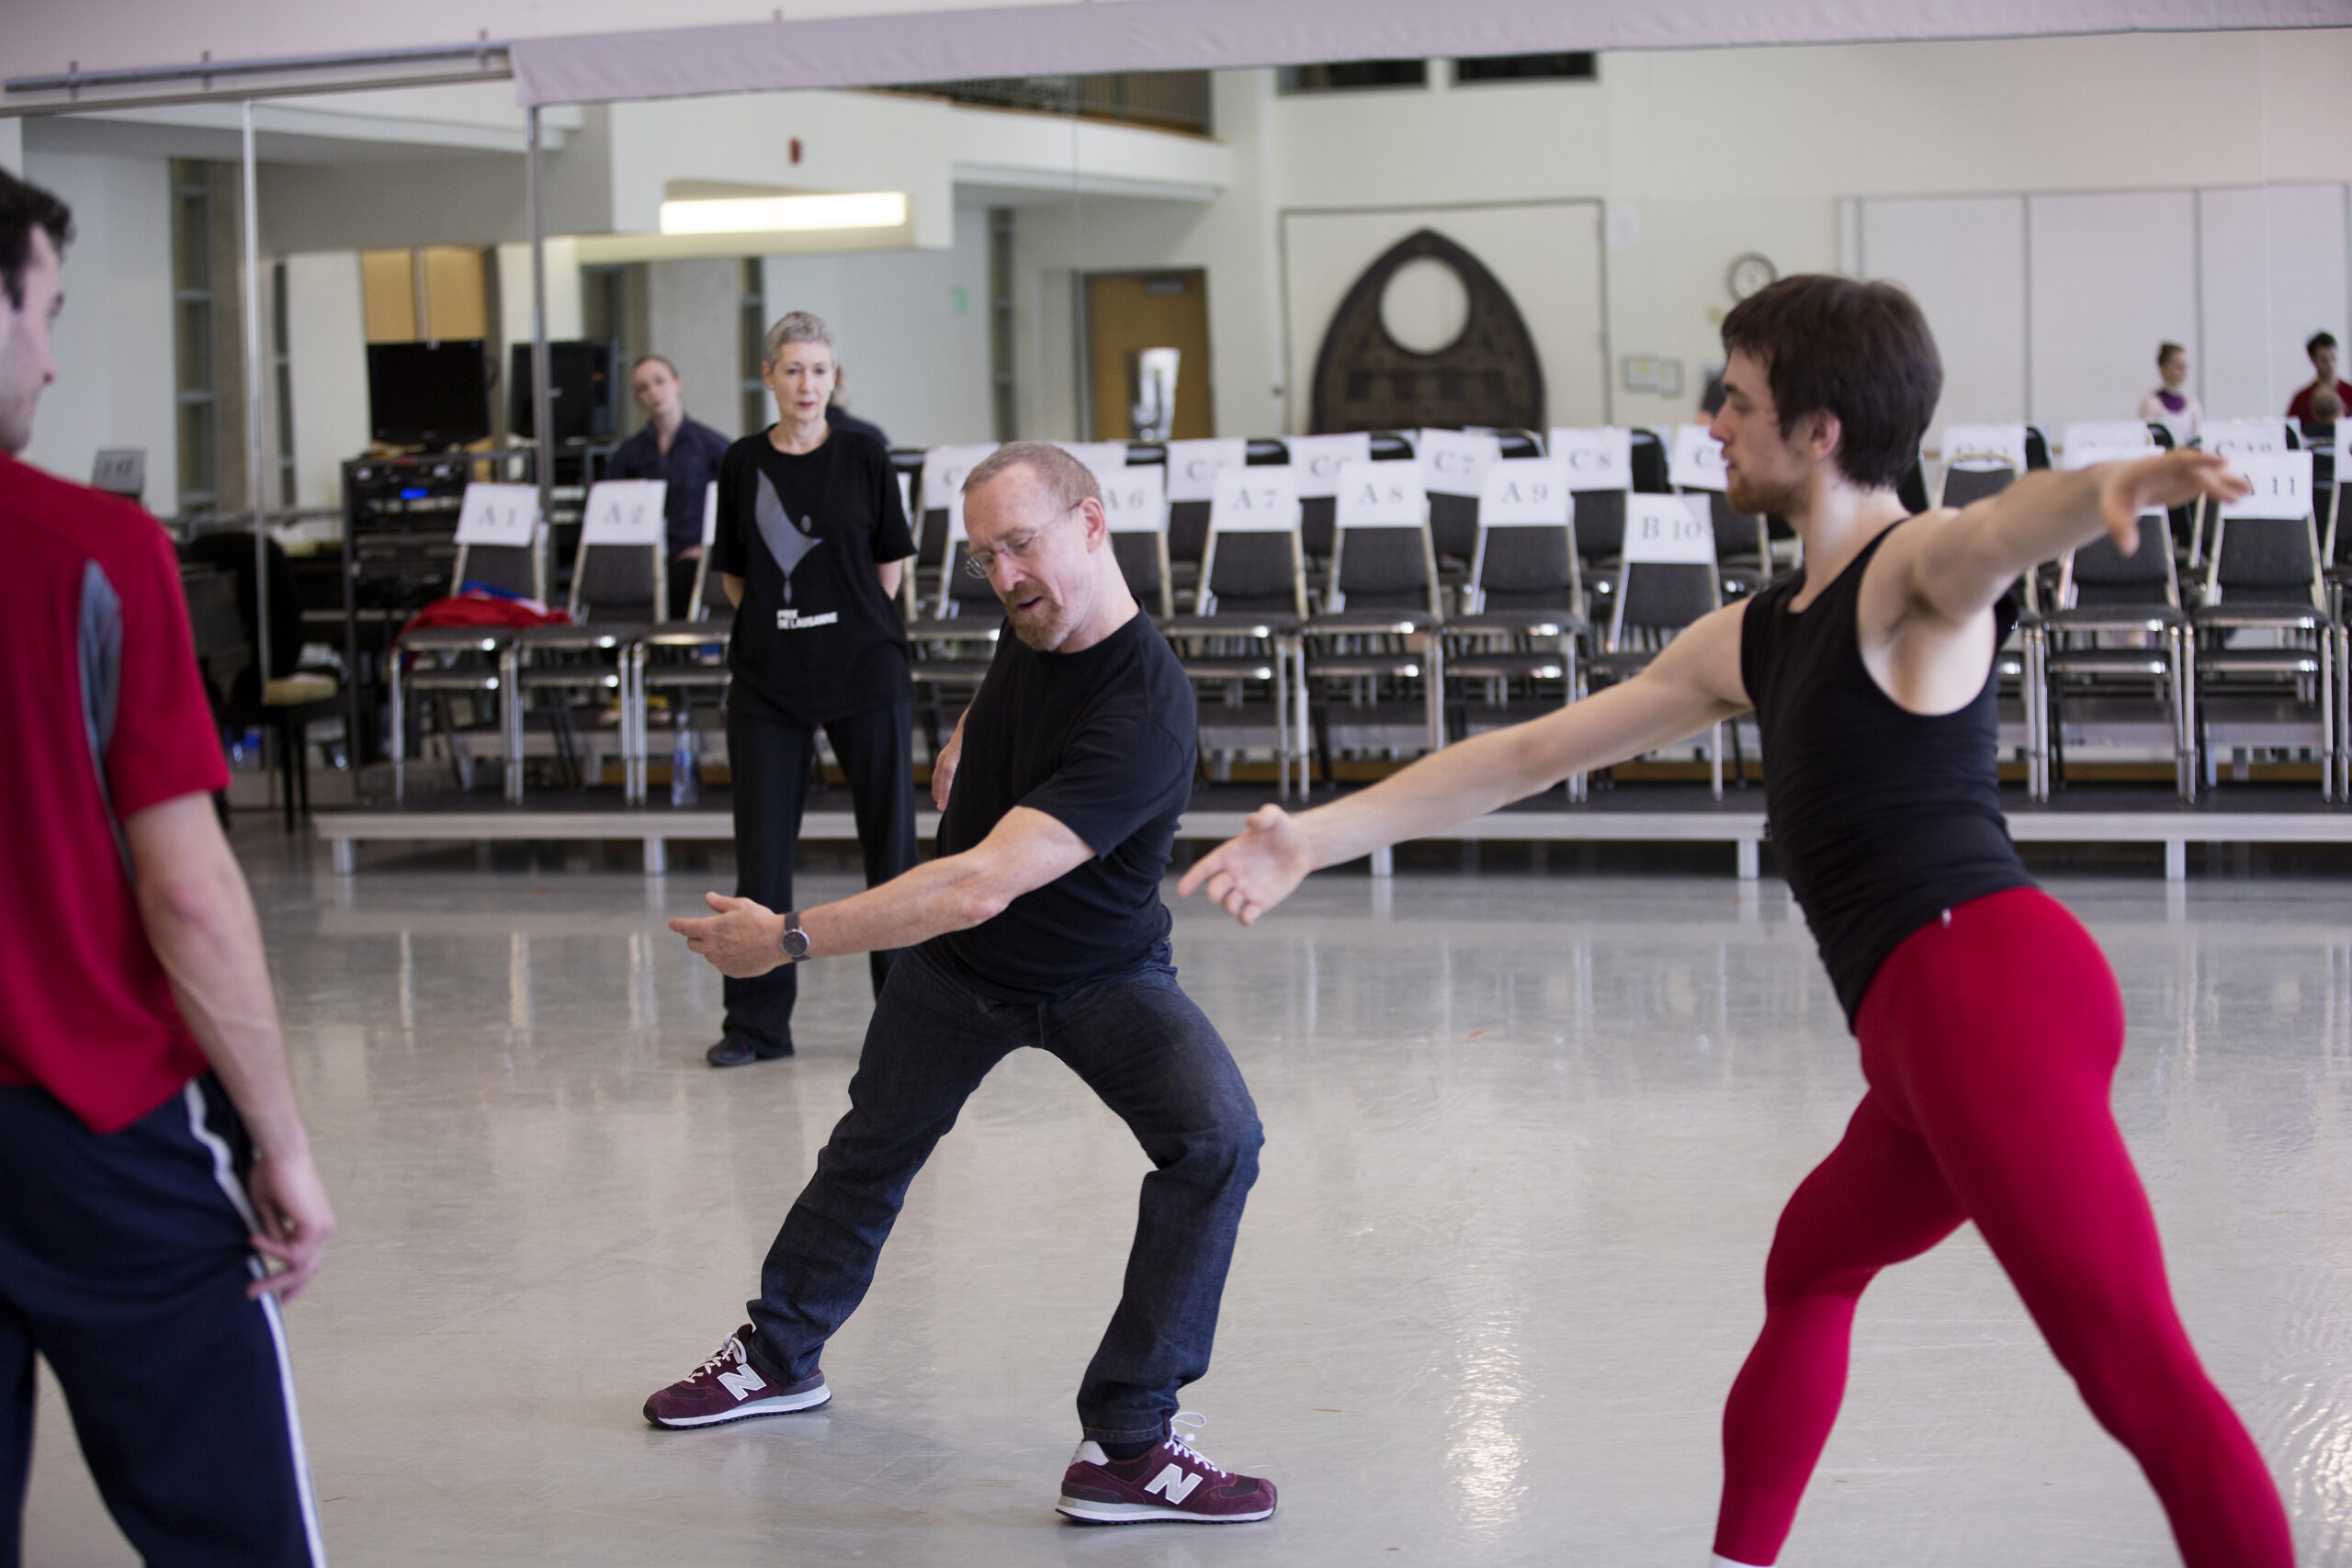 William Forsythe demonstrates a deep lunge, his upper body twisting to his open hip. A dancer facing him imitates the pose, while others stand and observe.